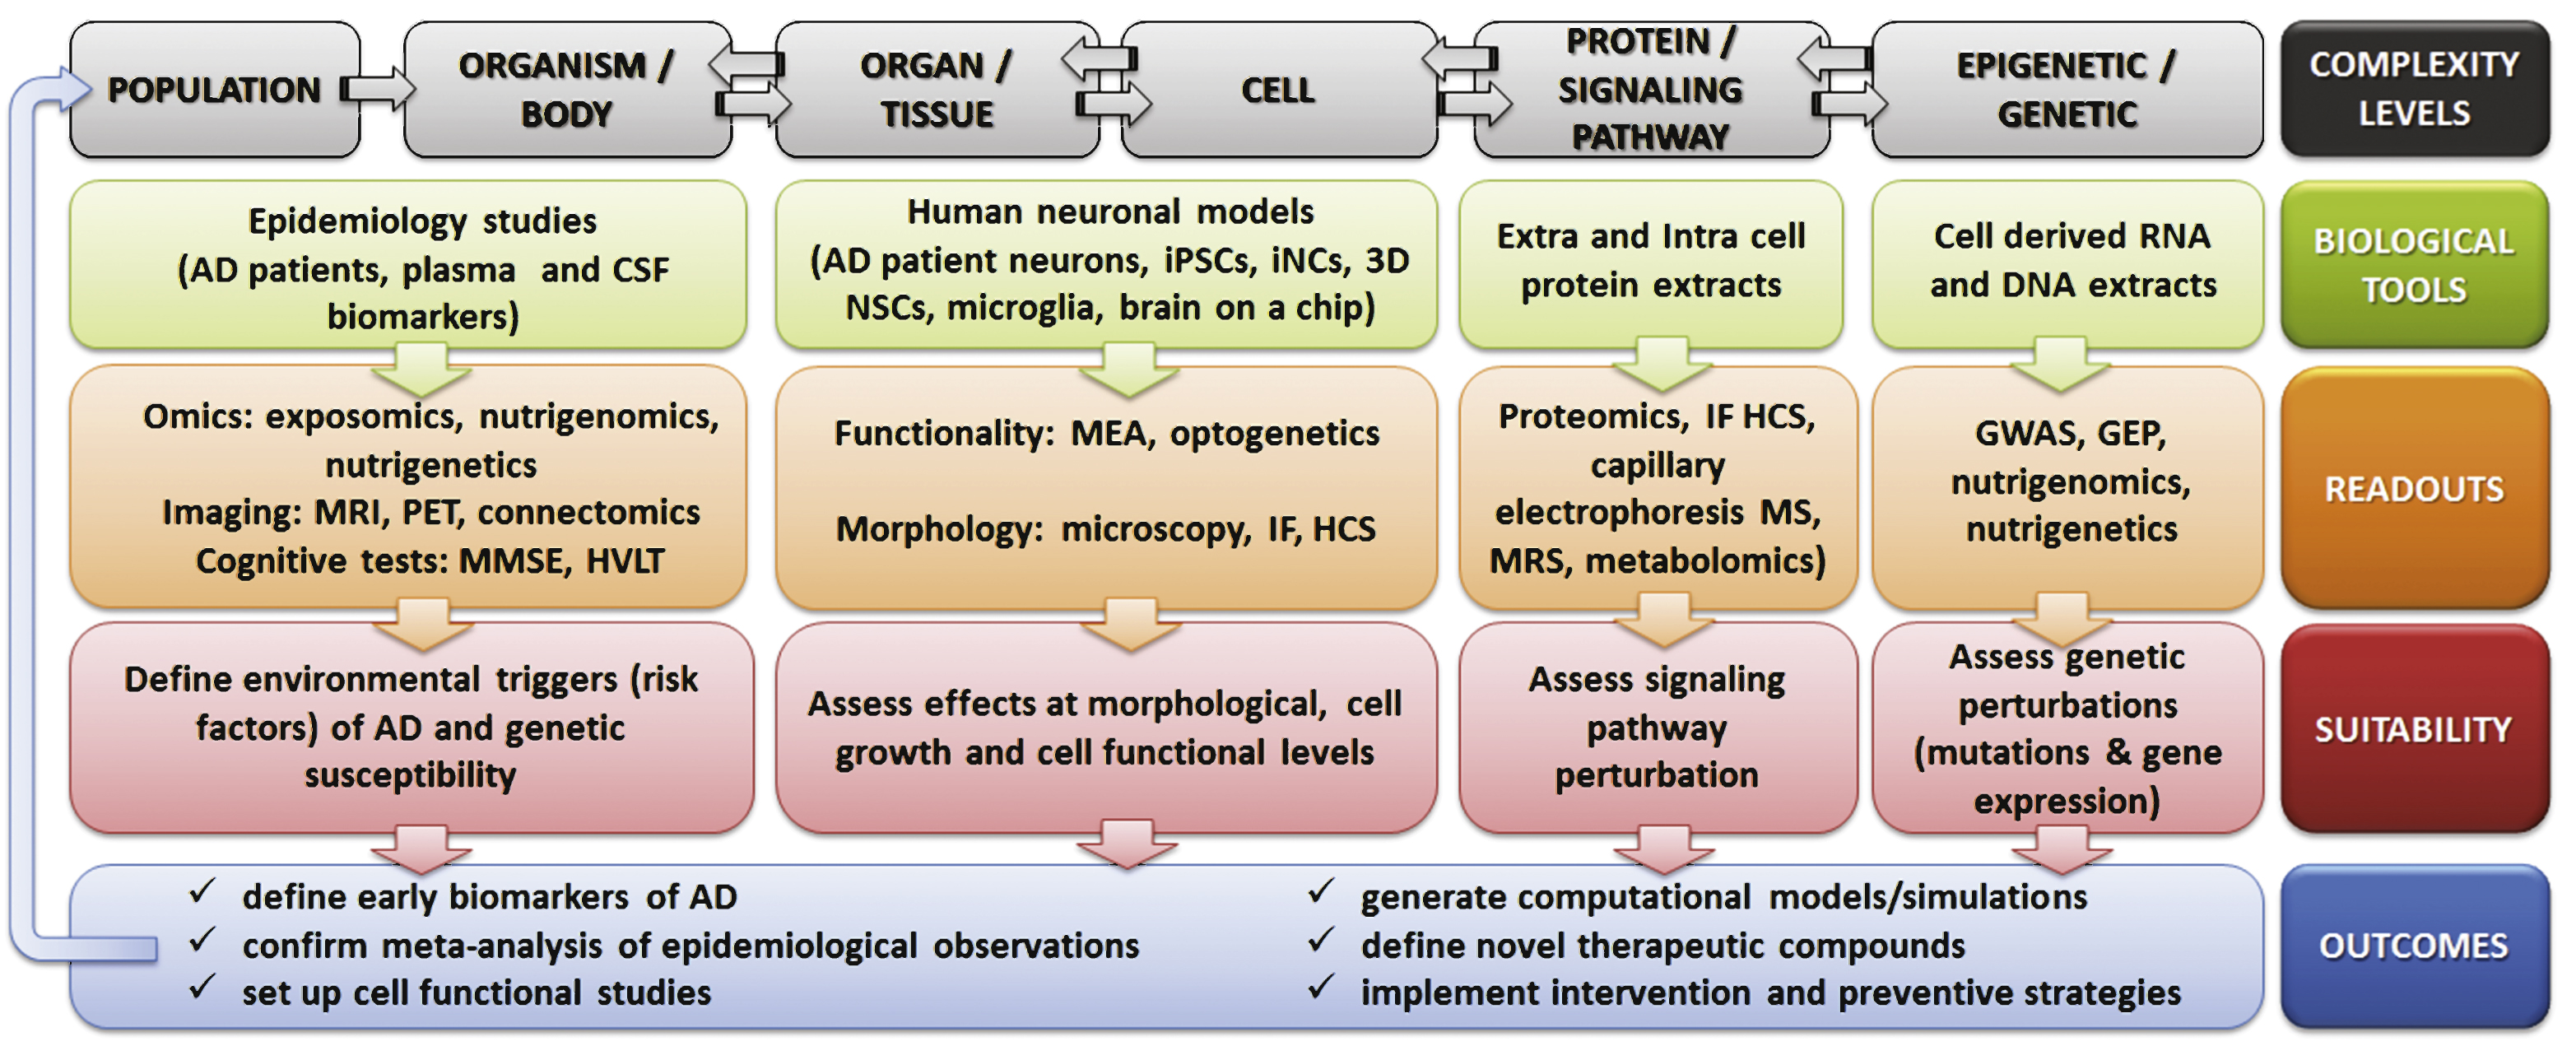 Overview of the novel available tools and readouts applicable to design human-oriented AD research, accounting for multiple levels of complexity. CSF, cerebrospinal fluid; MRI, magnetic resonance imaging; PET, positron emission tomography; MMSE, Mini-Mental State Examination; HVLT, Hopkins verbal learning test; iPSCs, induced pluripotent stem cells; iNCs, induced neuronal cells; NSCs, neural stem cells; MEA, microelectrode array; IF HCS, immunofluorescence-high content screening; MS, mass spectrometry; MRS, magnetic resonance spectroscopy; GWAS, genome-wide association studies; GEP, gene expression profiling.